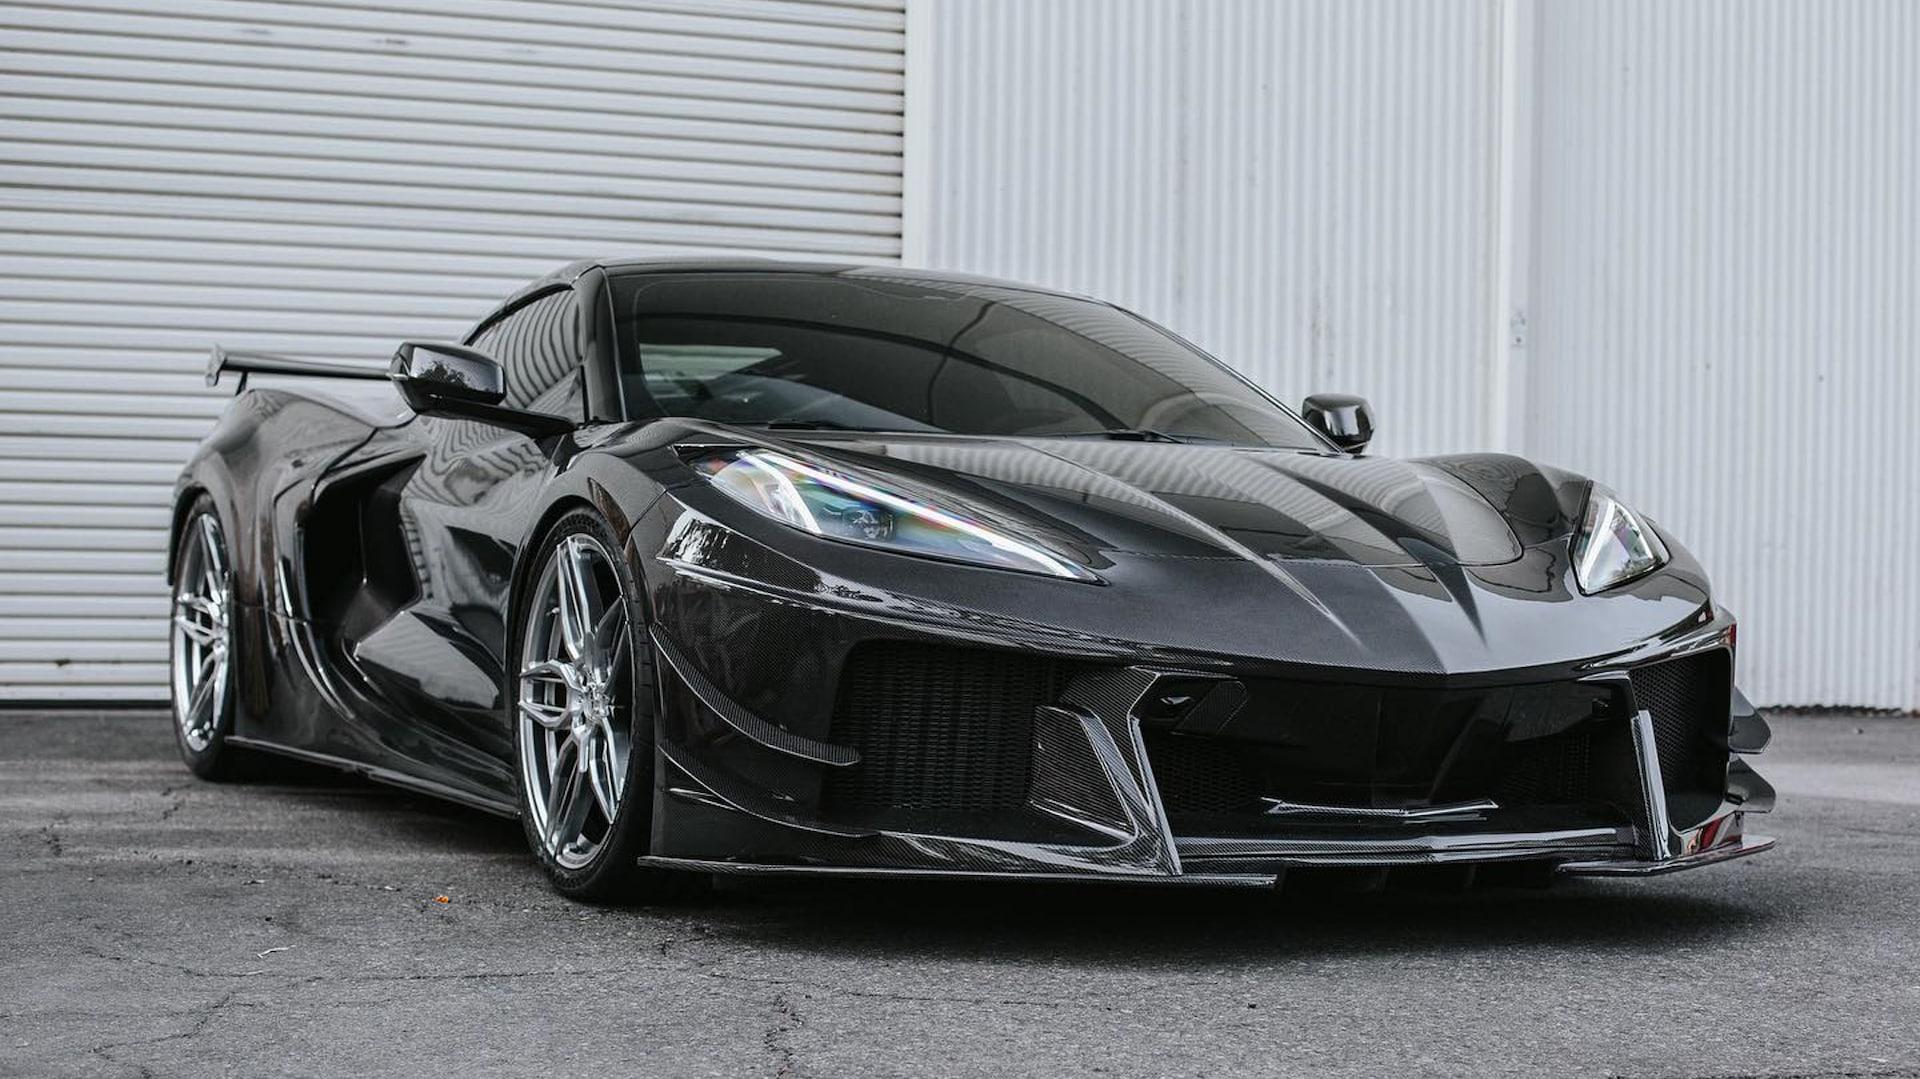 Z06 Width Now Available For Non Chevy C8 Corvettes Via